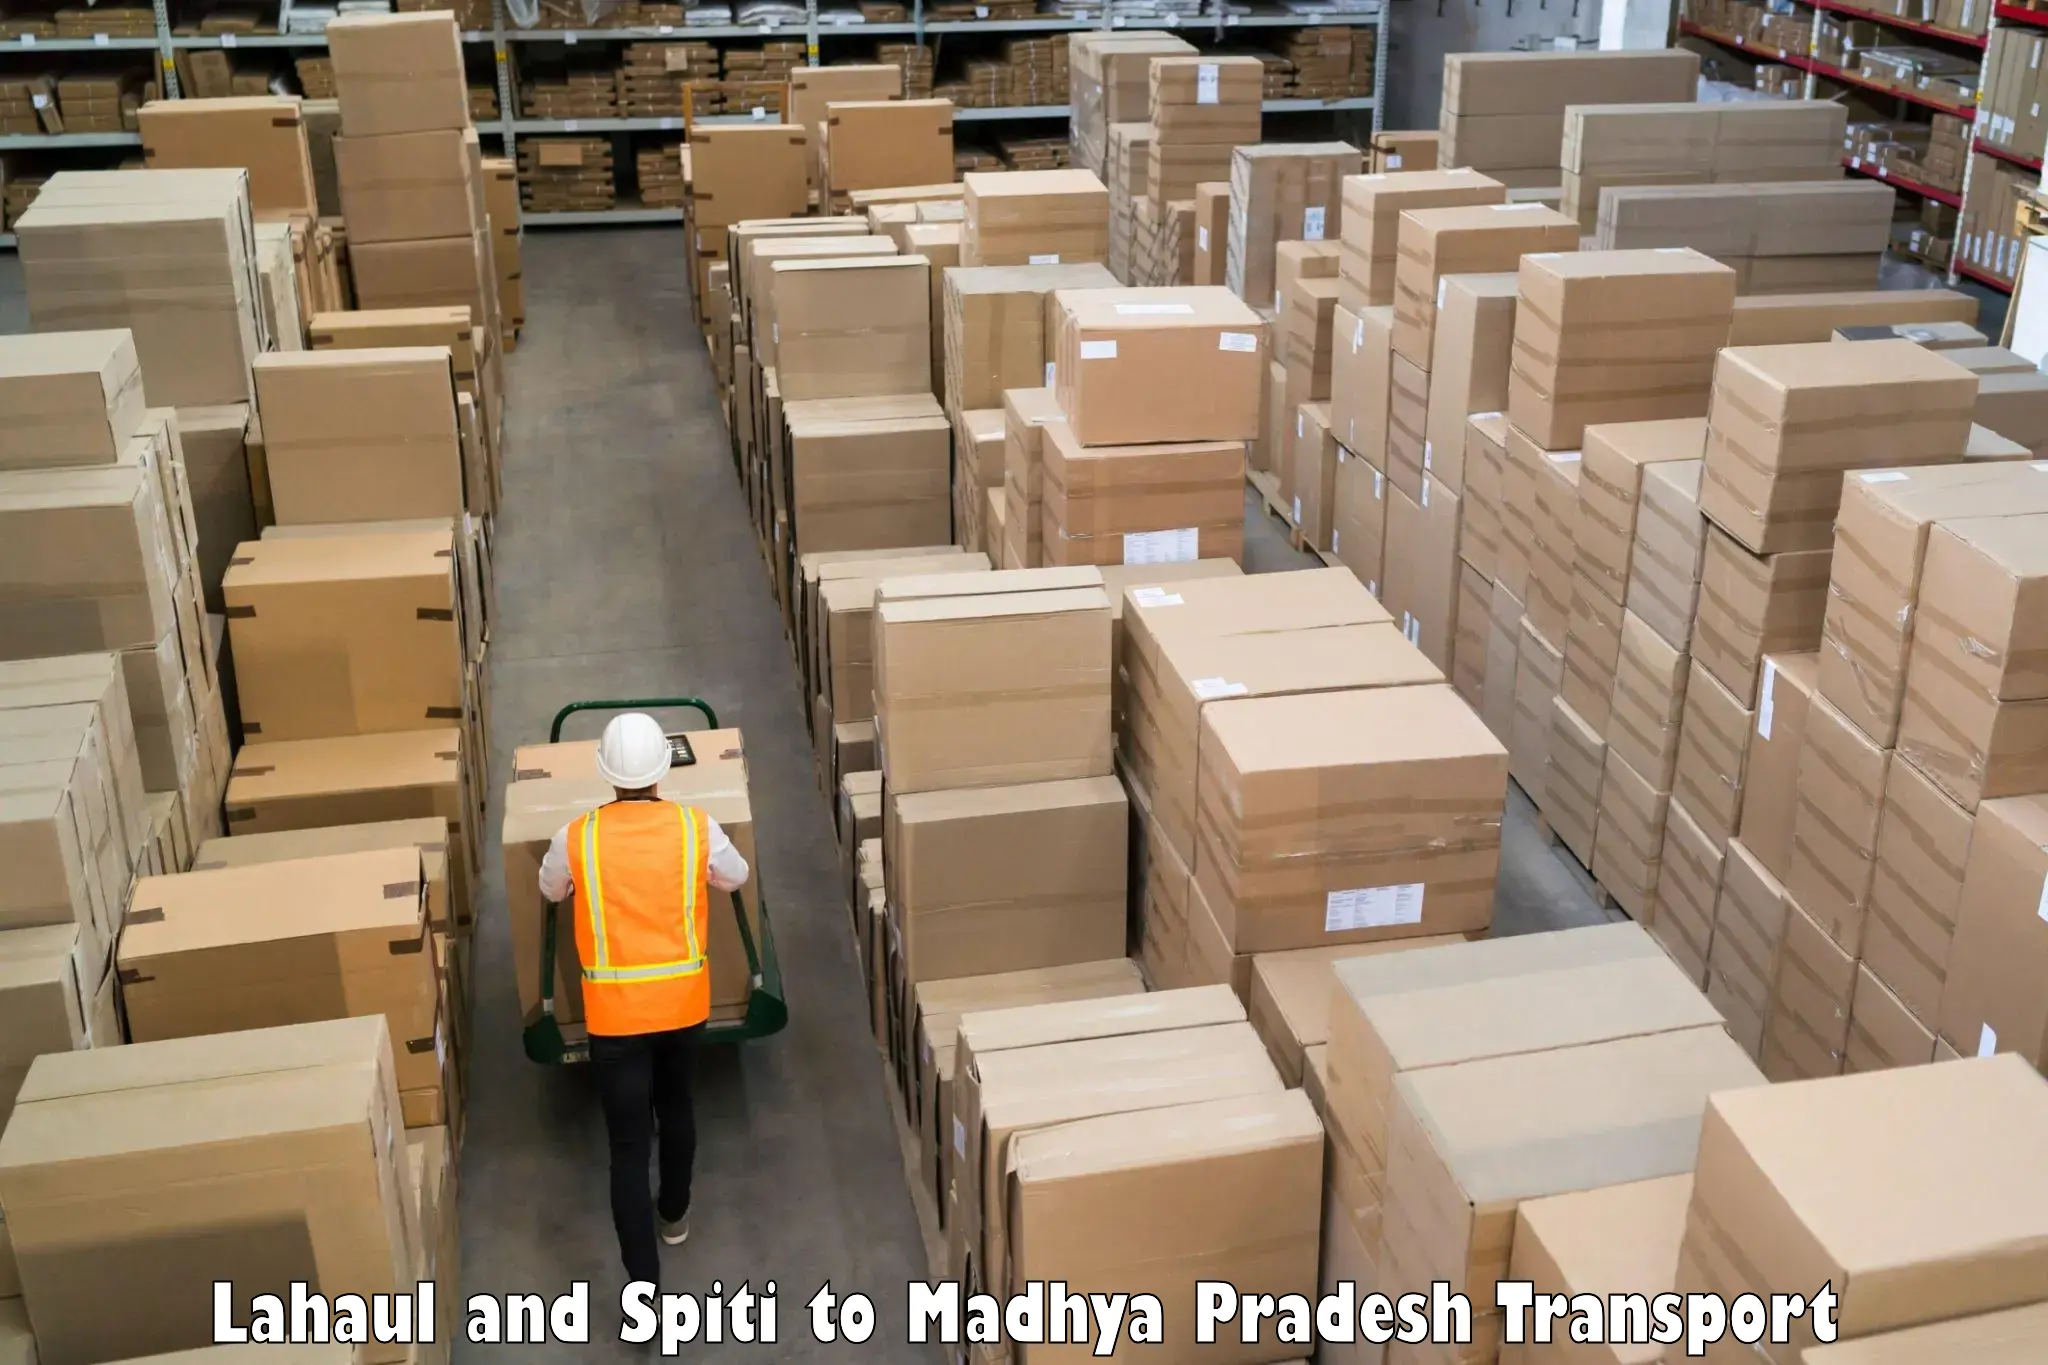 Parcel transport services Lahaul and Spiti to Petlawad